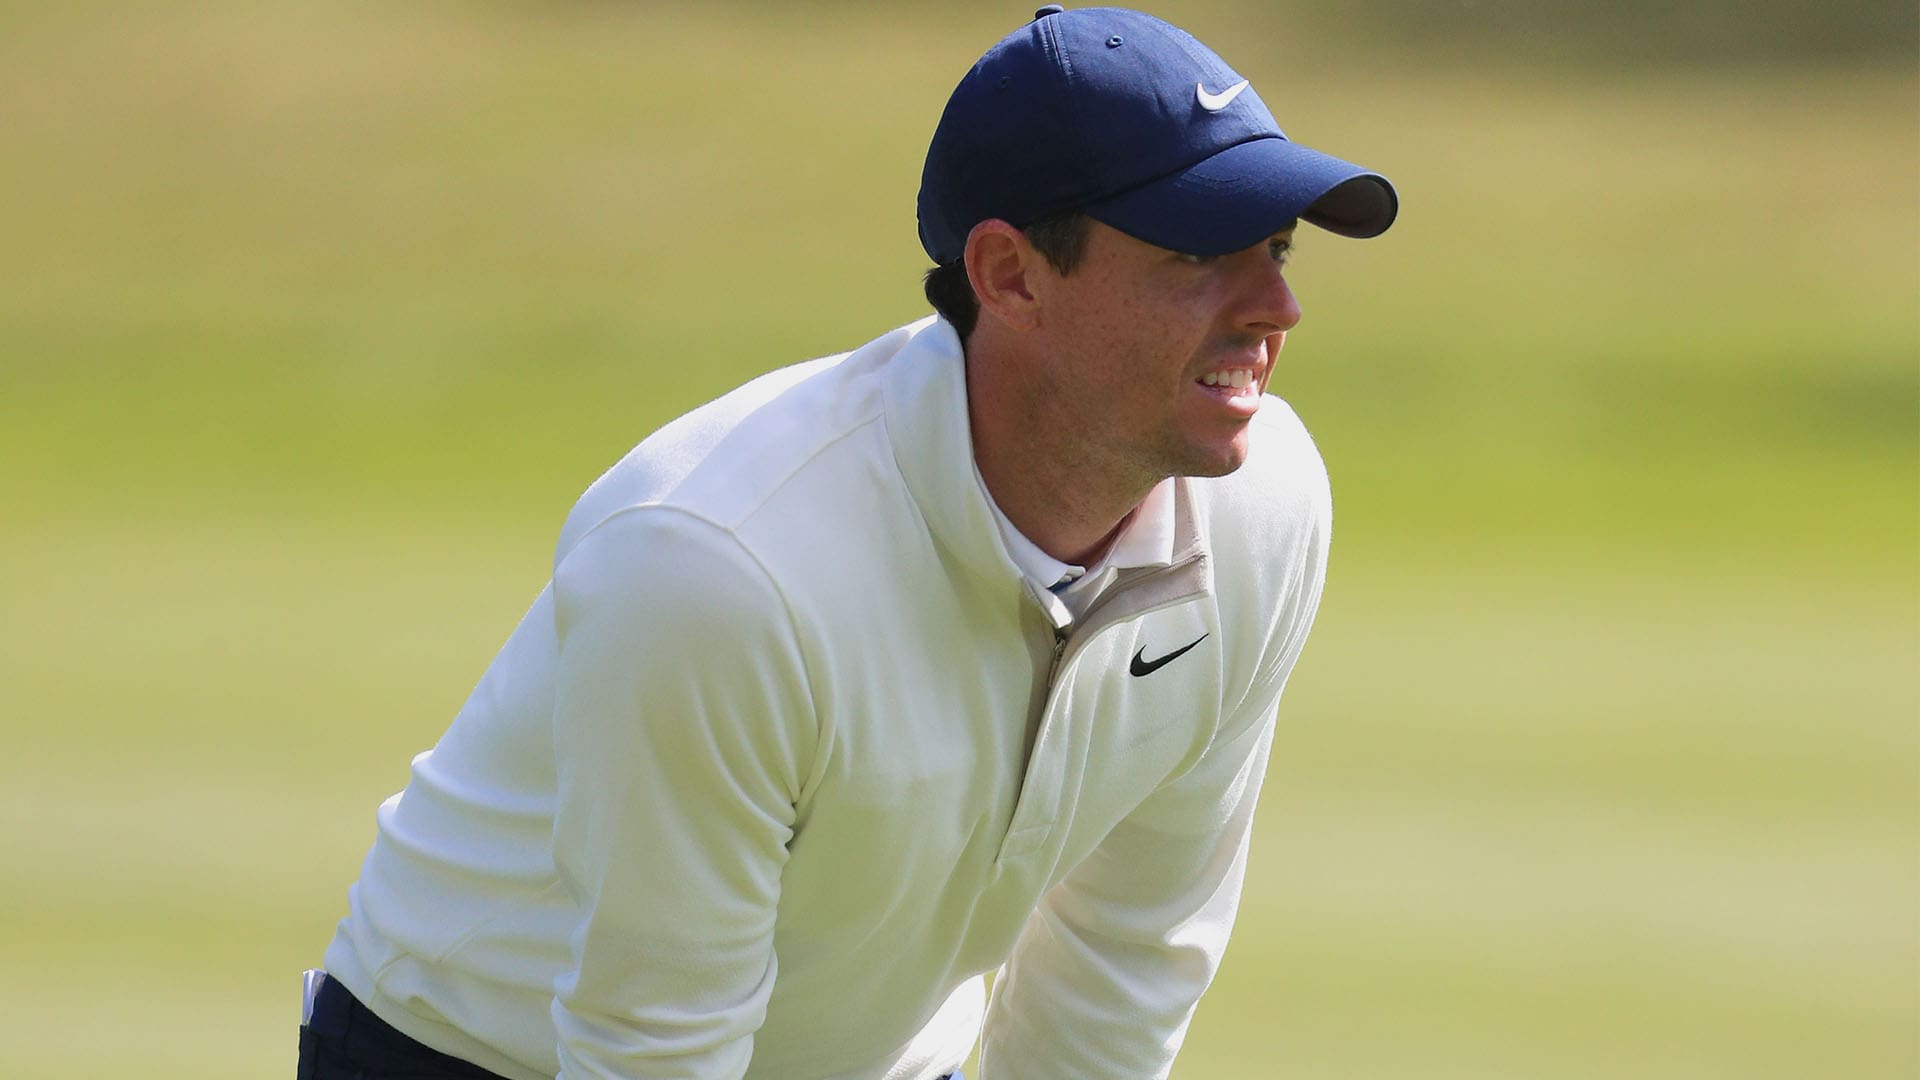 Rory McIlroy intentionally made his lie worse so that he wouldn’t feel guilty